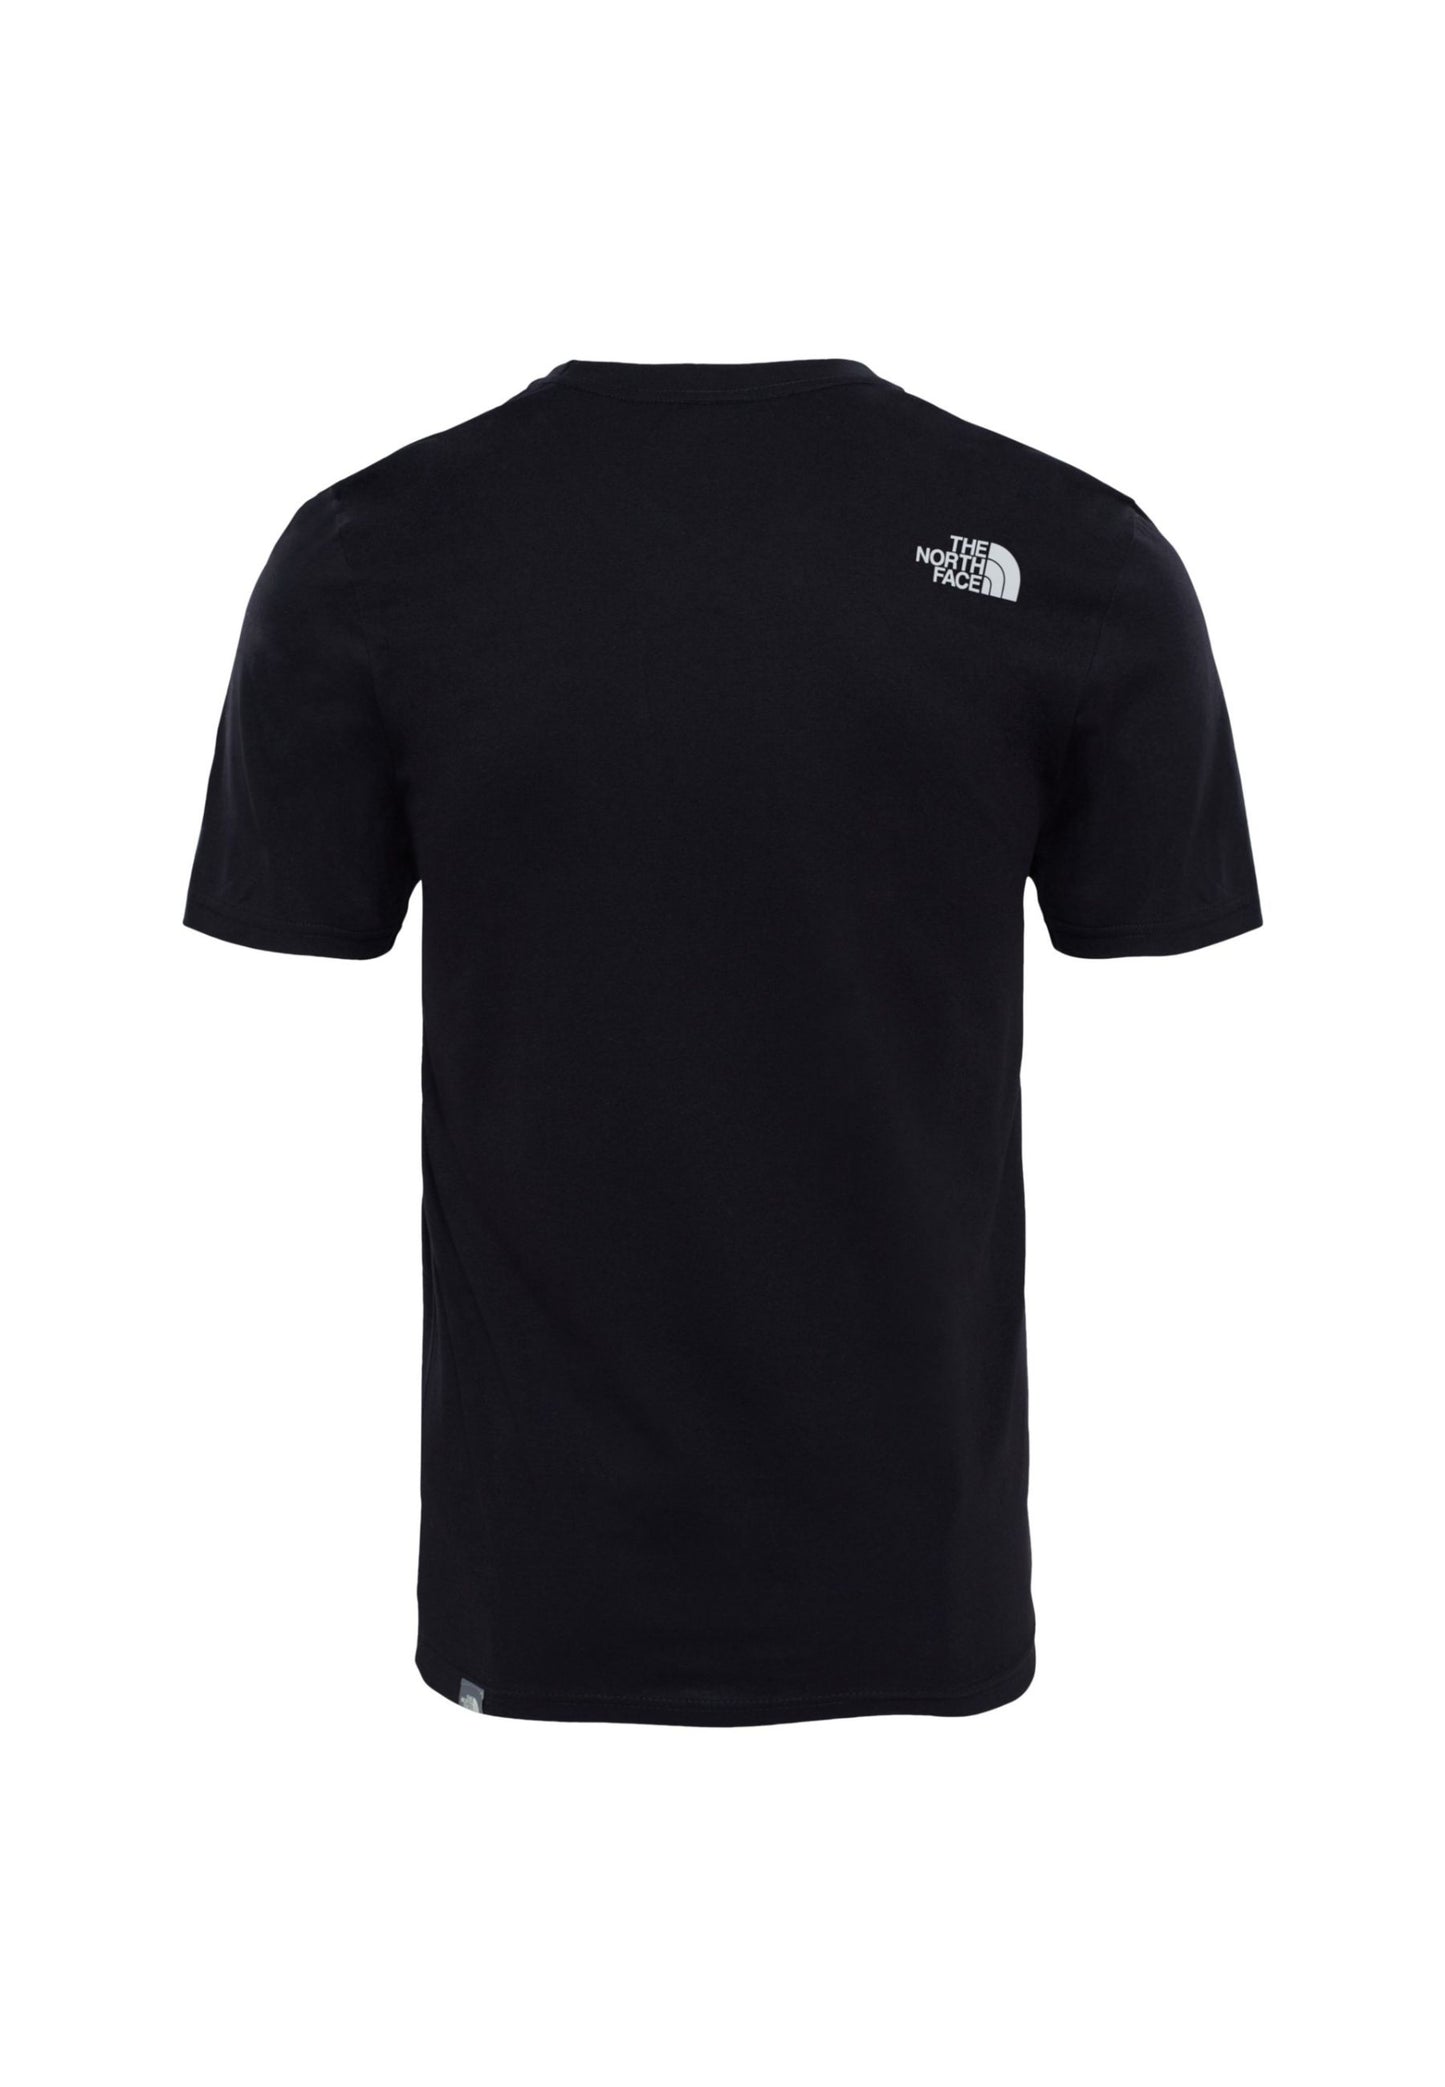 T-SHIRT EASY THE NORTH FACE